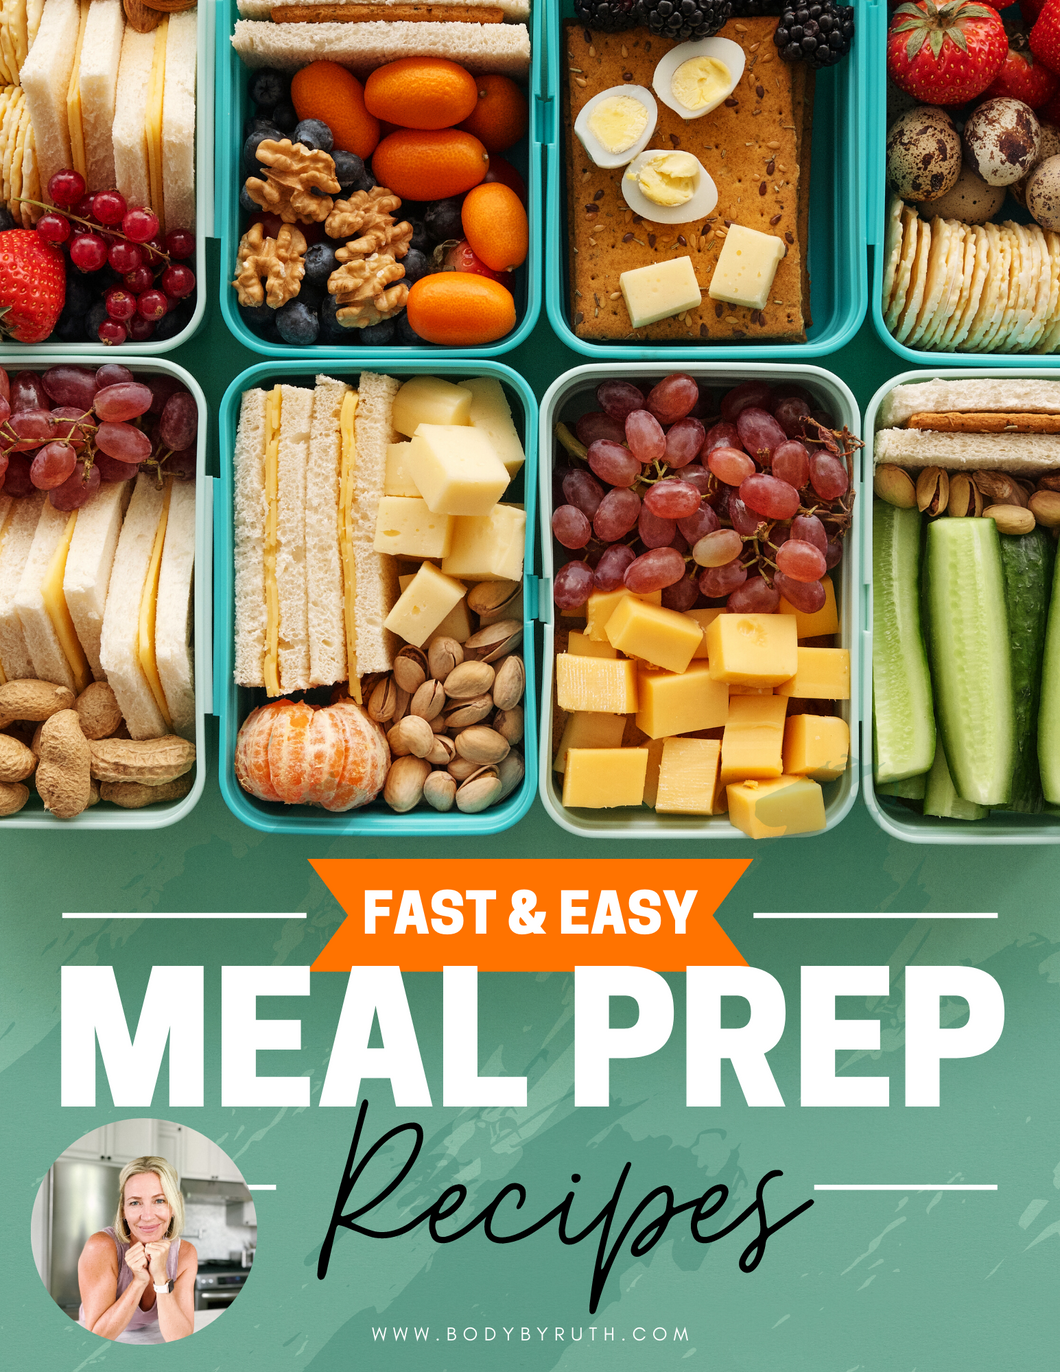 Fast and Easy Meal Prep Ideas